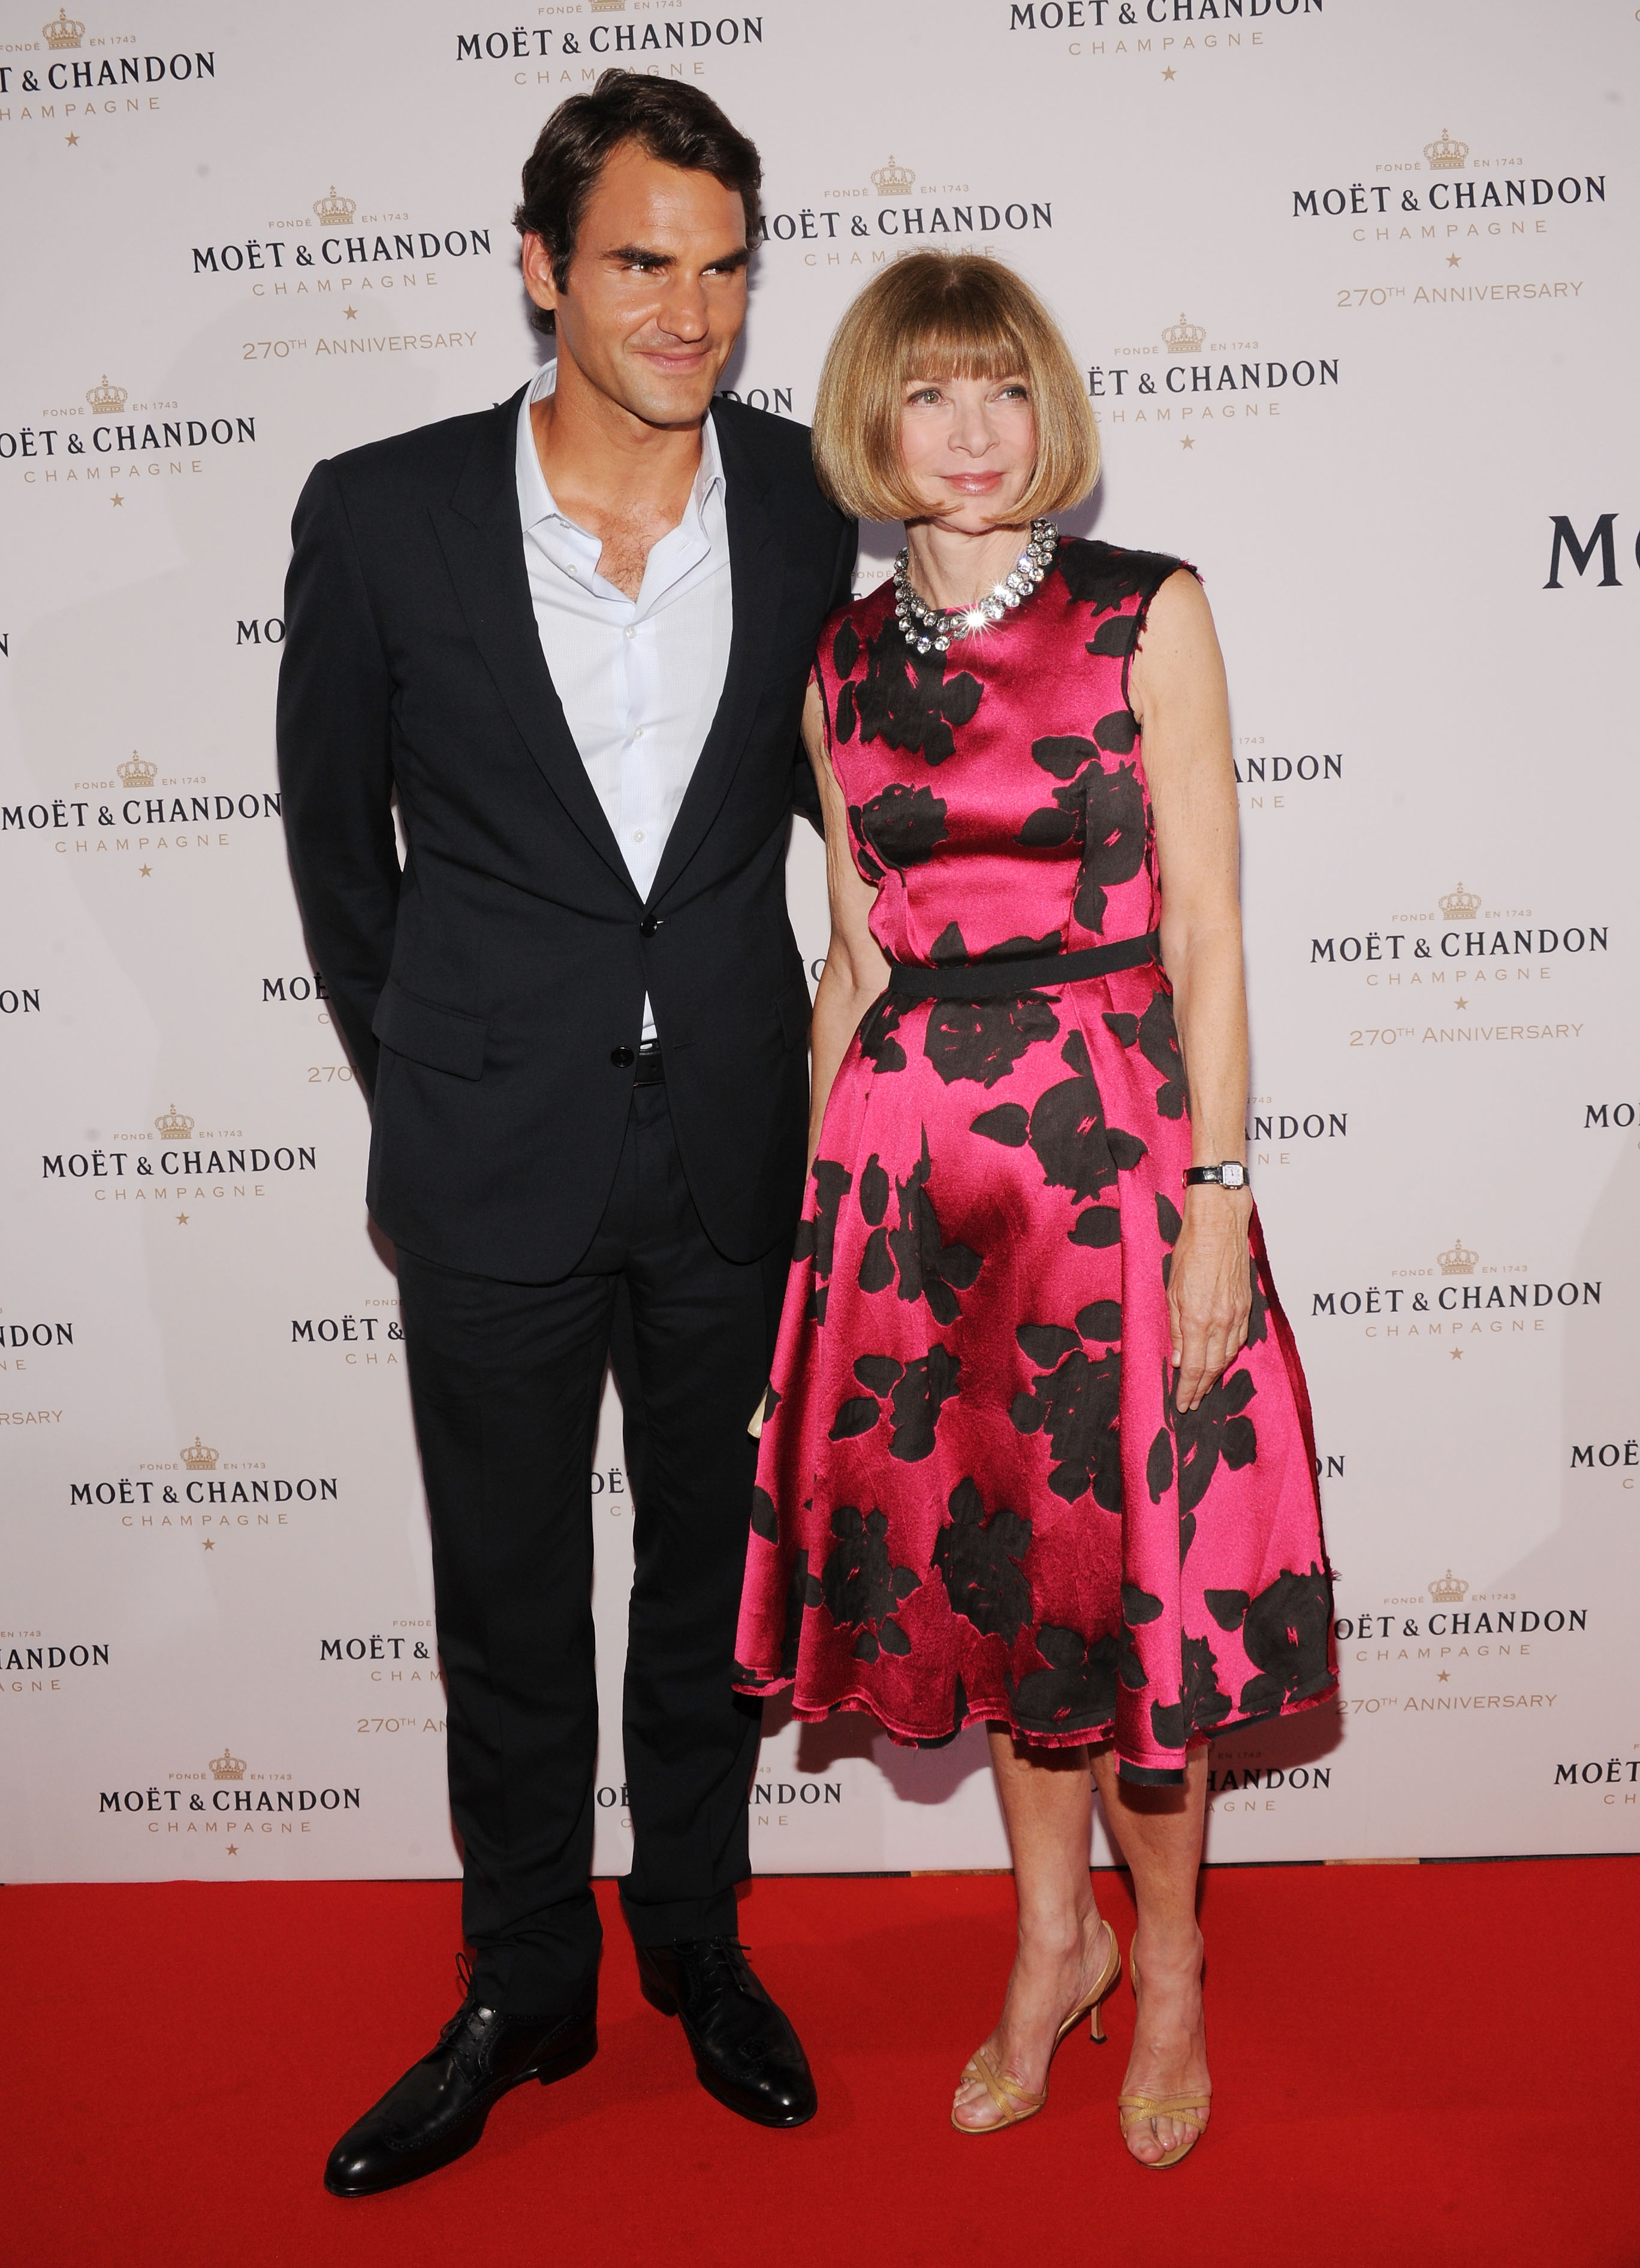 NEW YORK, NY - AUGUST 20:  Professional Tennis Player Roger Federer (L) and Vogue Editor-in-Chief Anna Wintour attend Moet & Chandon Celebrates Its 270th Anniversary With New Global Brand Ambassador, International Tennis Champion, Roger Federer at Chelsea Piers Sports Center on August 20, 2013 in New York City.  (Photo by Bryan Bedder/Getty Images for Moet & Chandon)